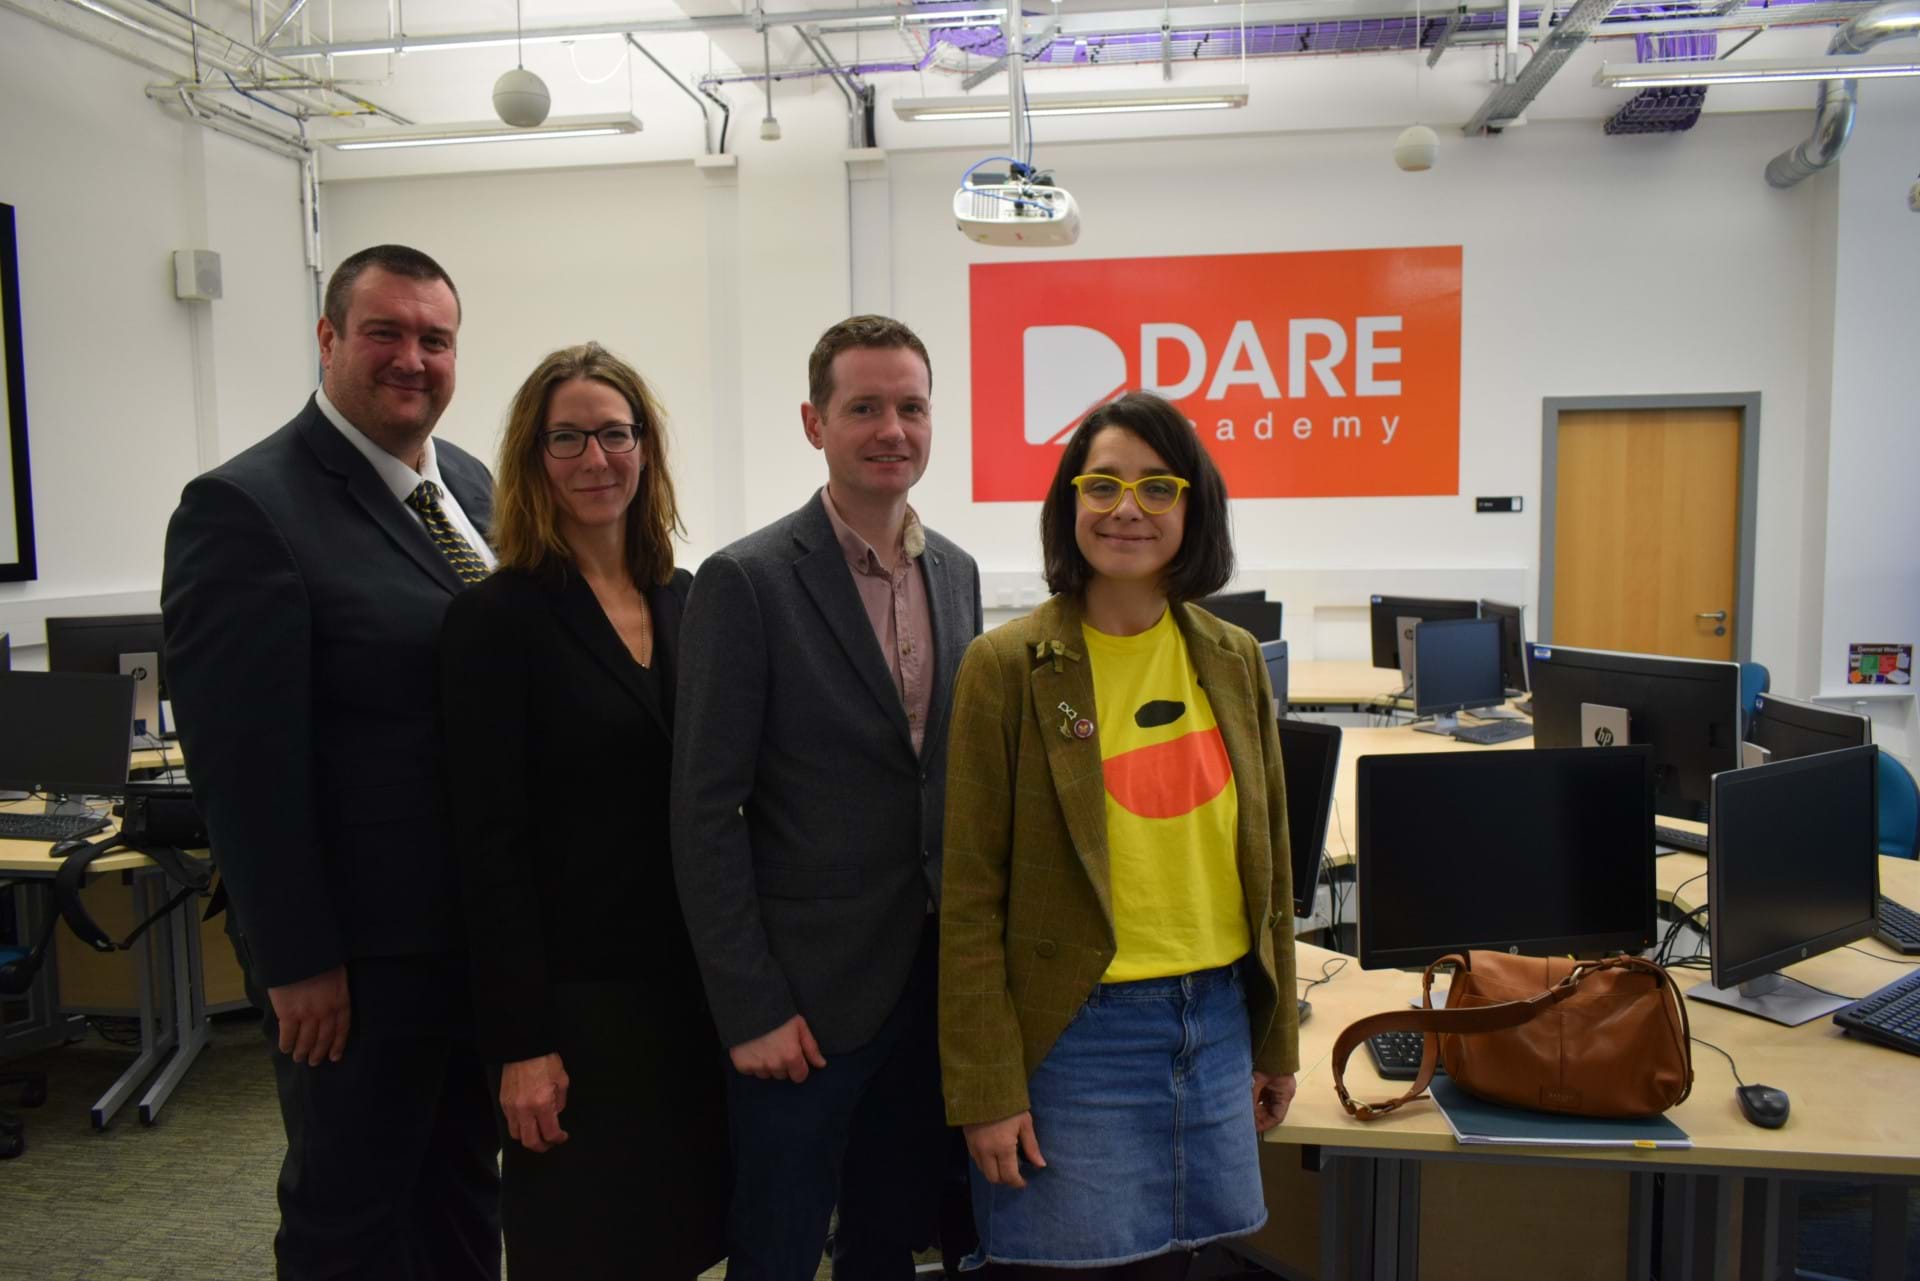 Alisdair McNaughton, Kate Wyatt, Chris Forde and lecturer Lynne Love in front of a Dare Academy logo